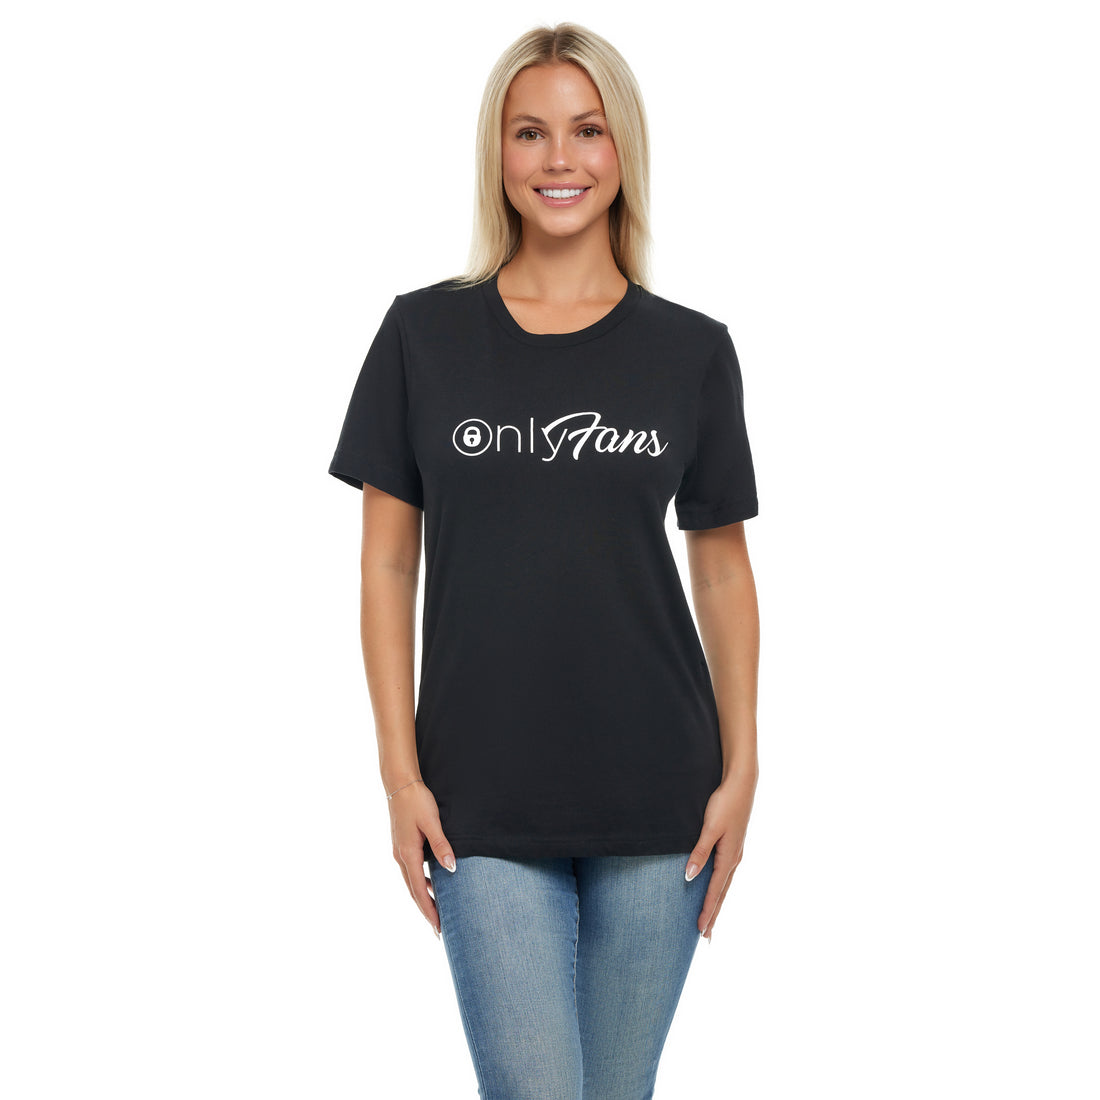 OnlyFans Classic Tee - Black